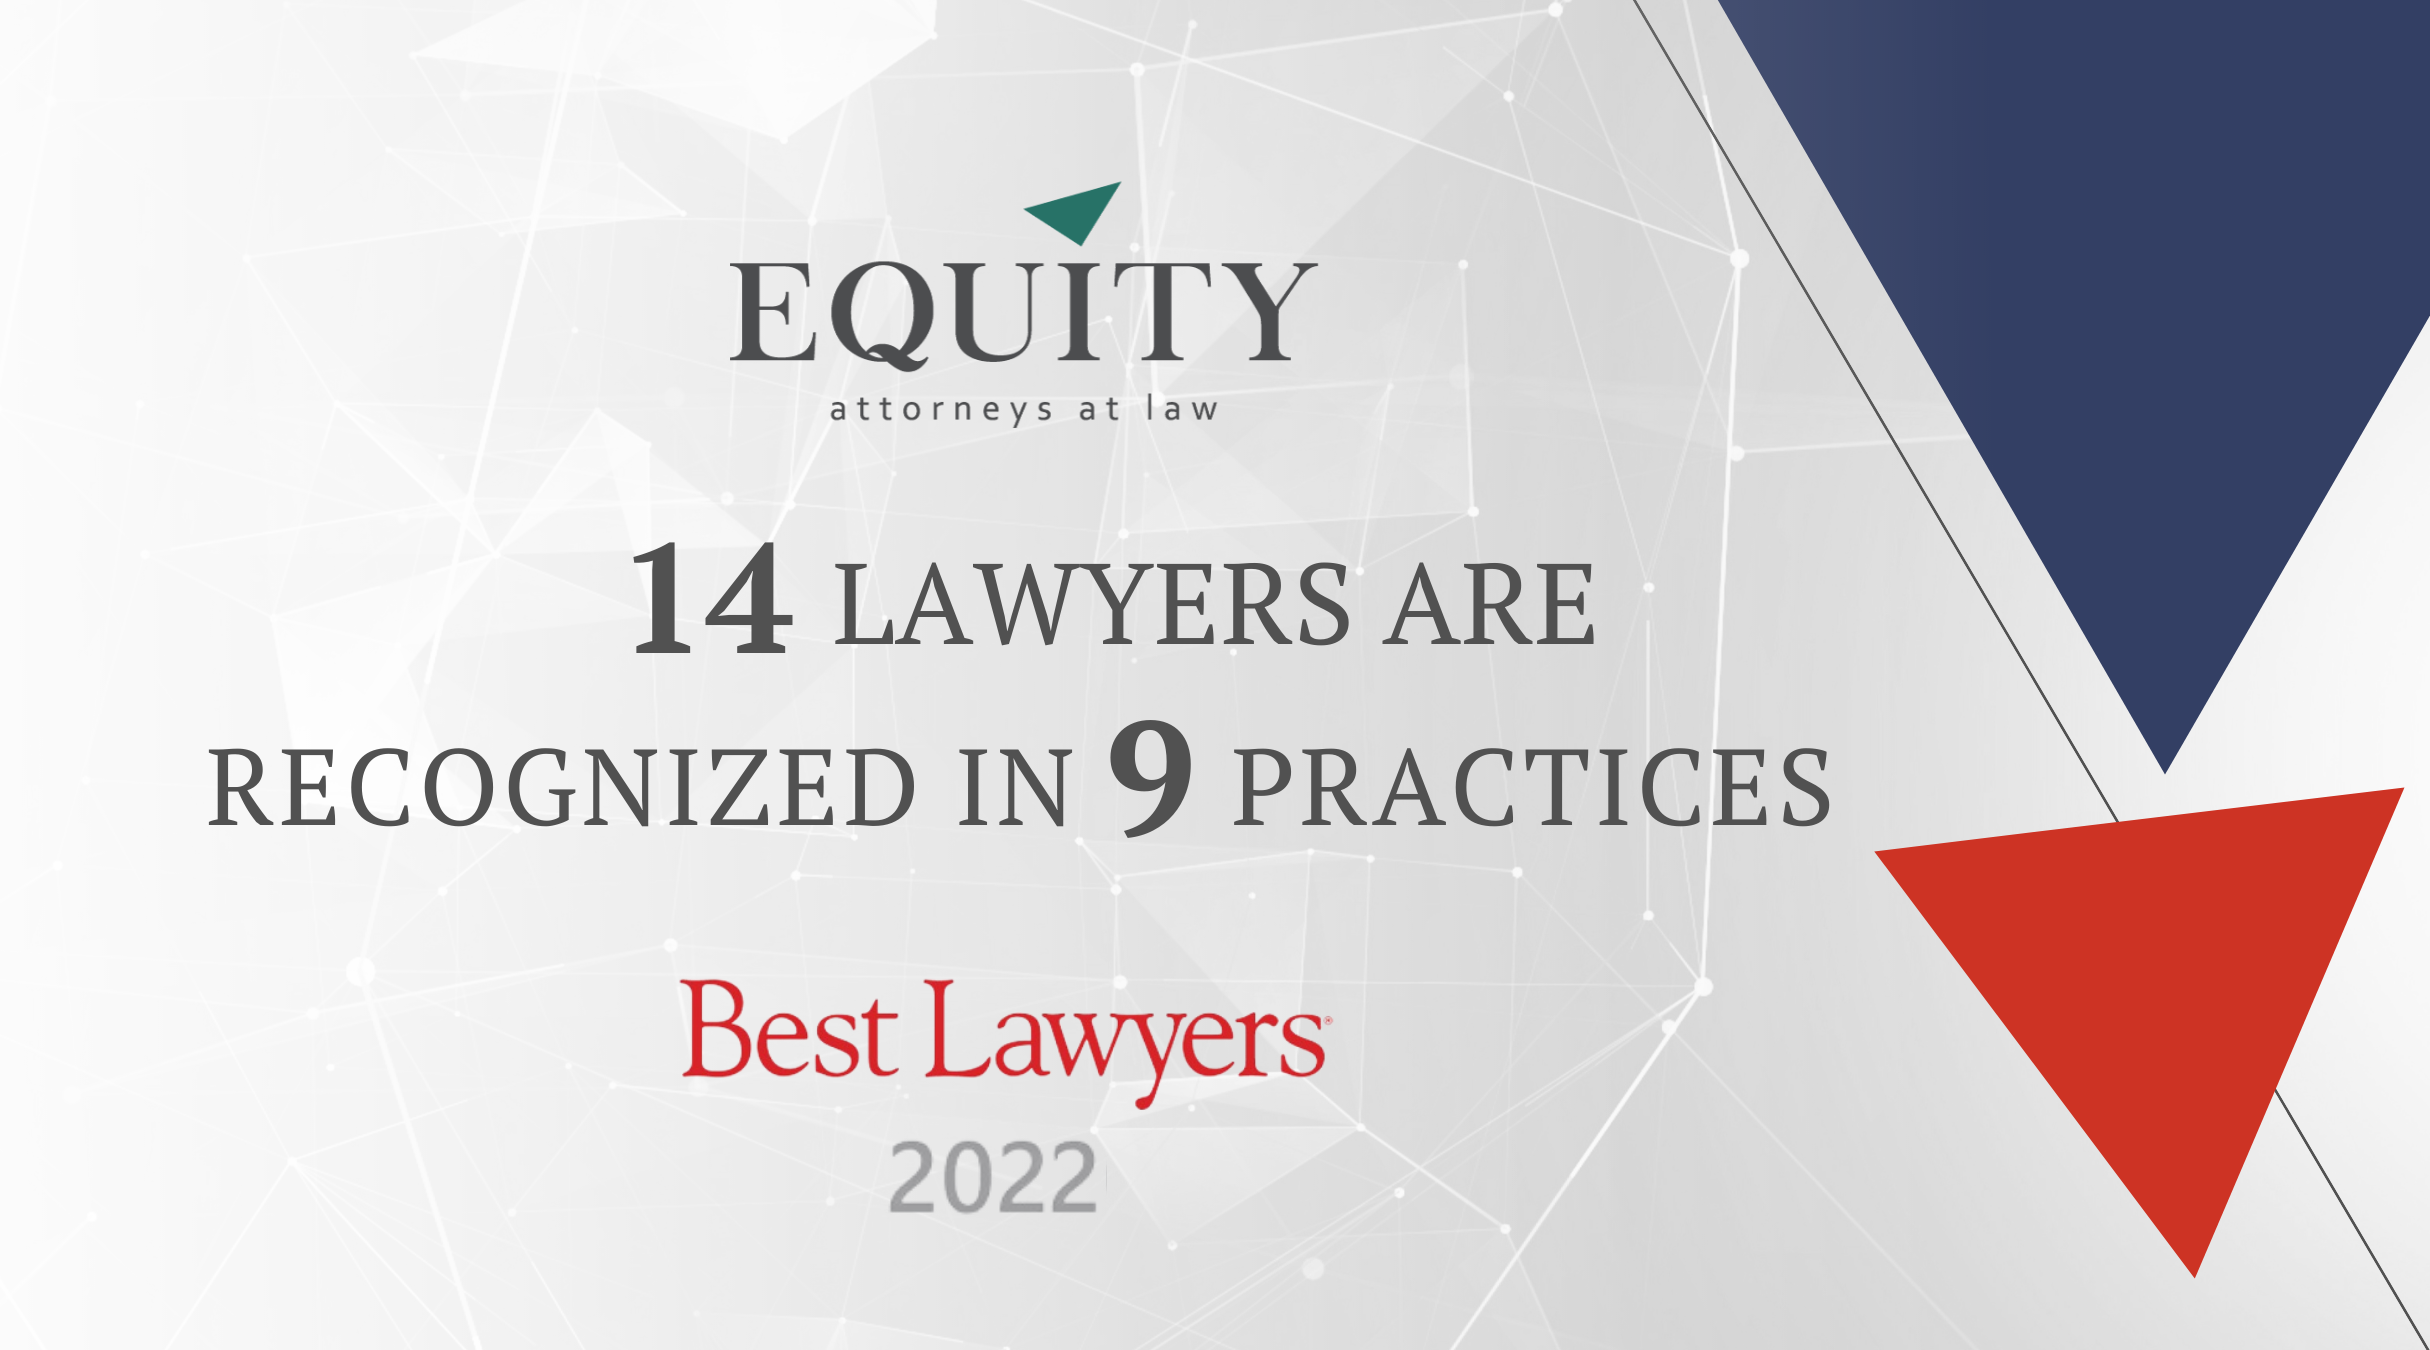 The 2020 edition of the Best Lawyers in Ukraine has released!